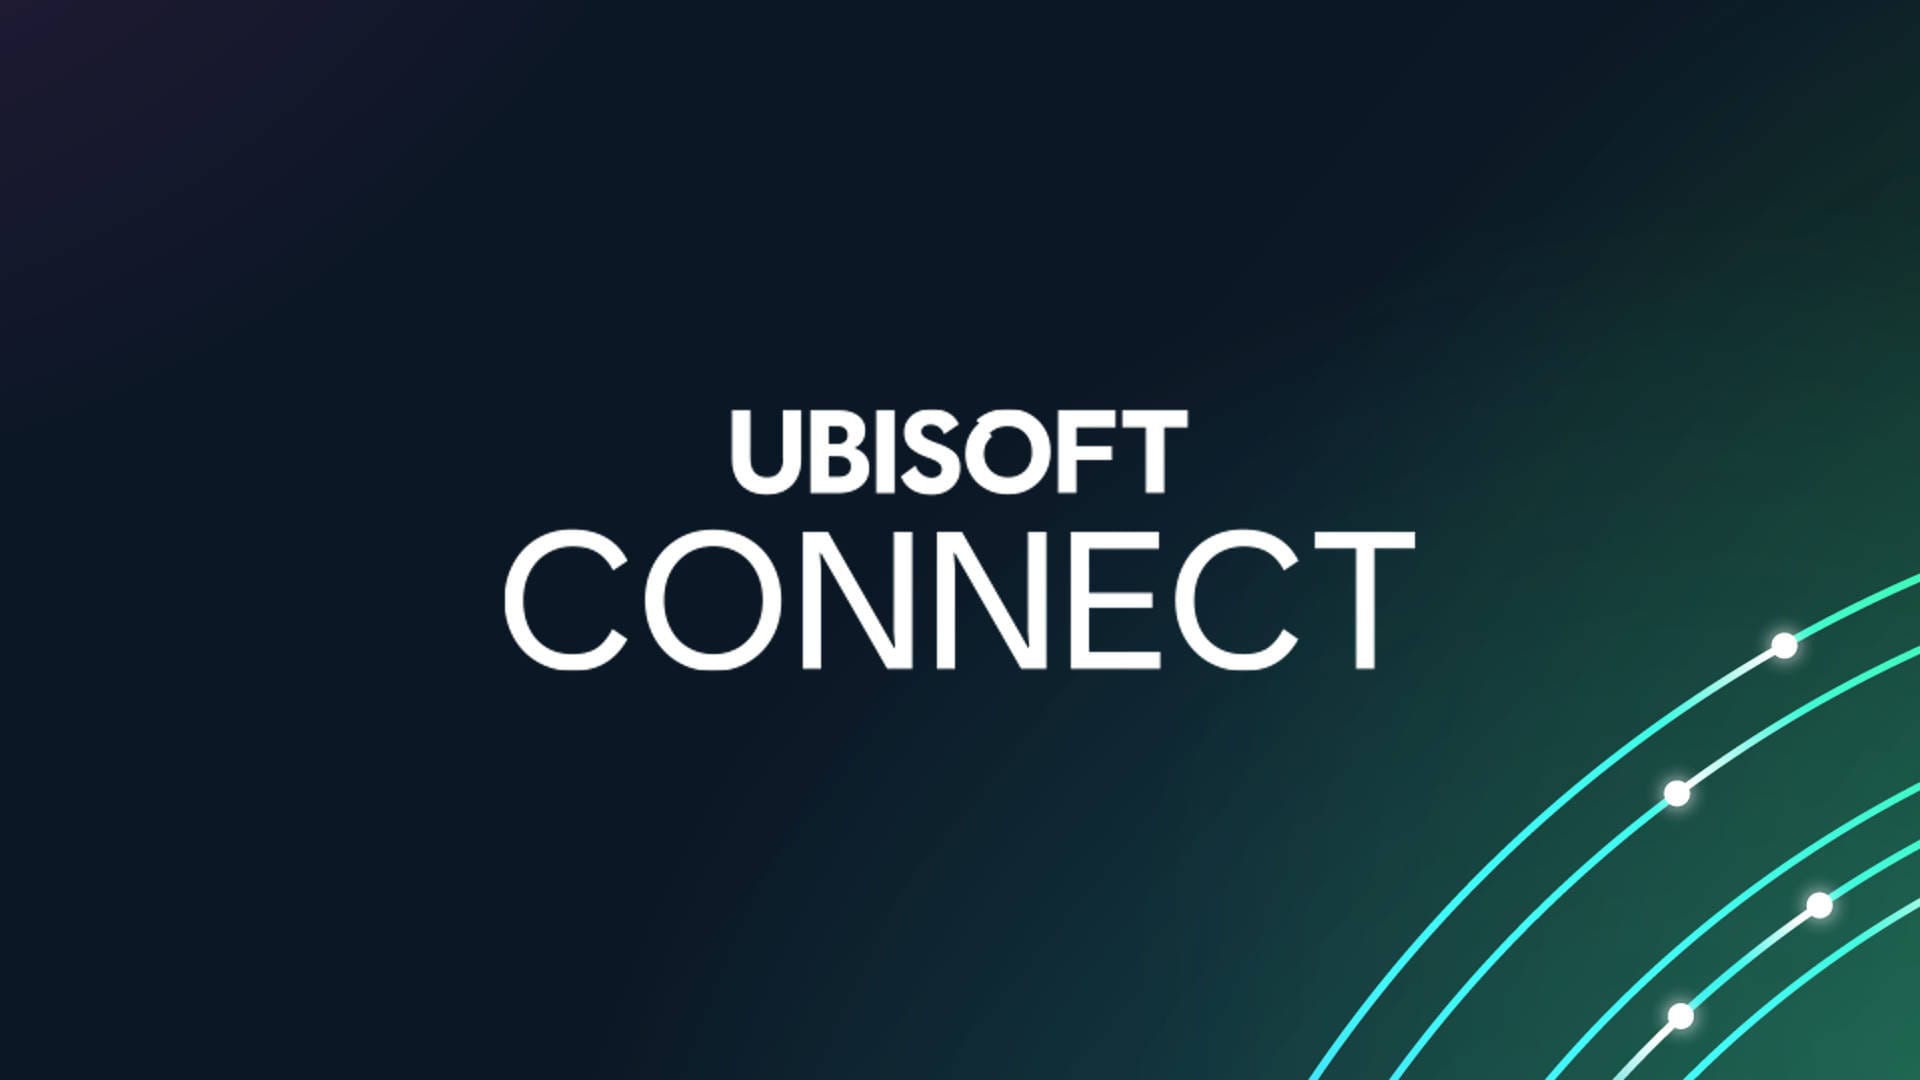 Connect chat. Ubisoft connect.